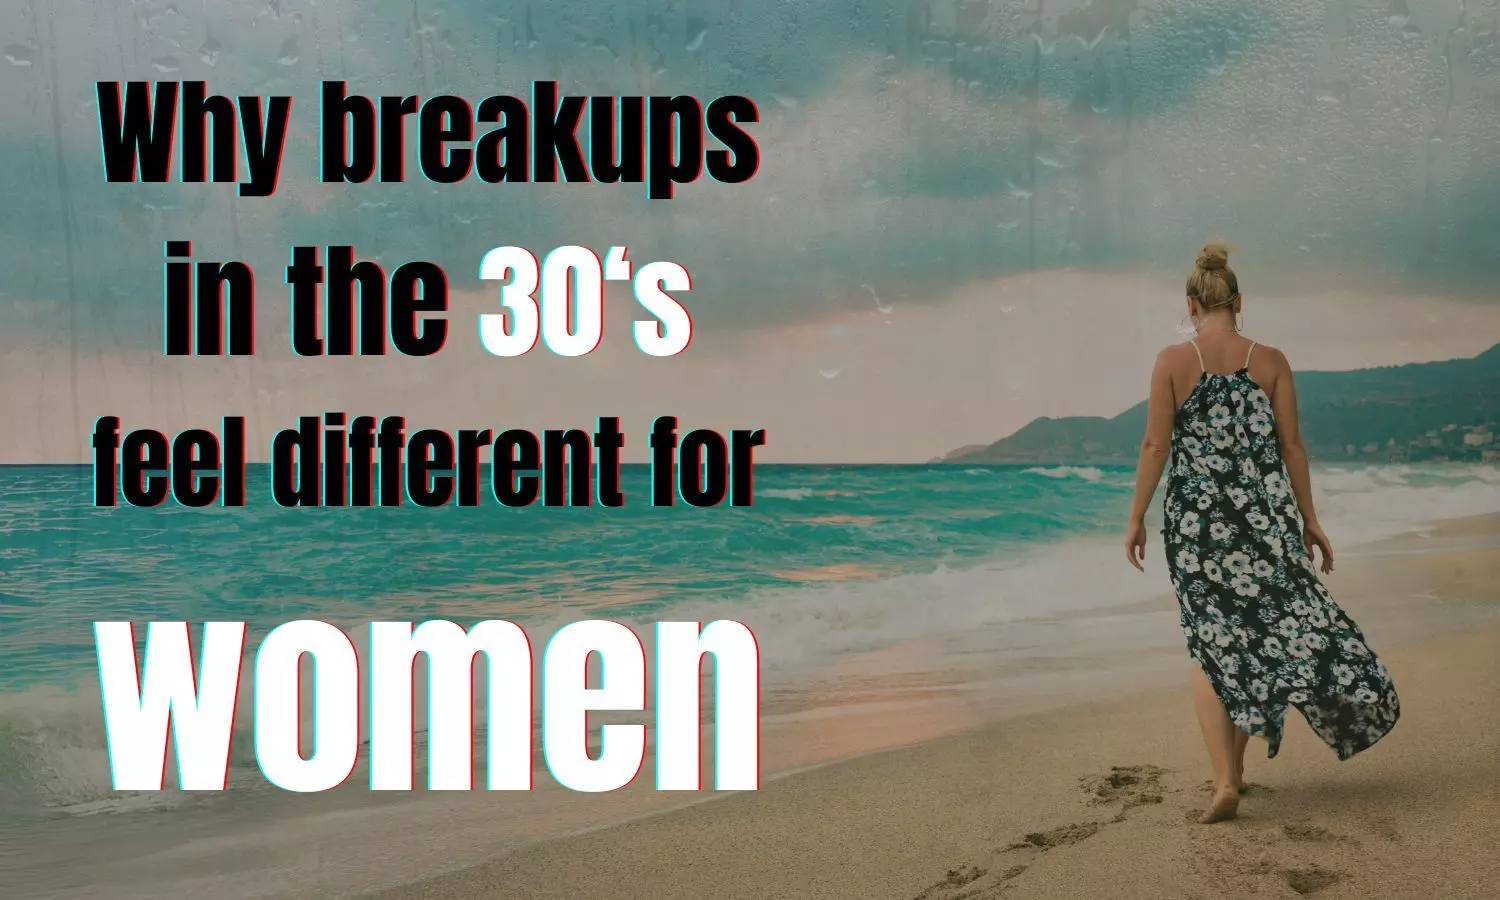 Why breakups in 30s feel different for women?